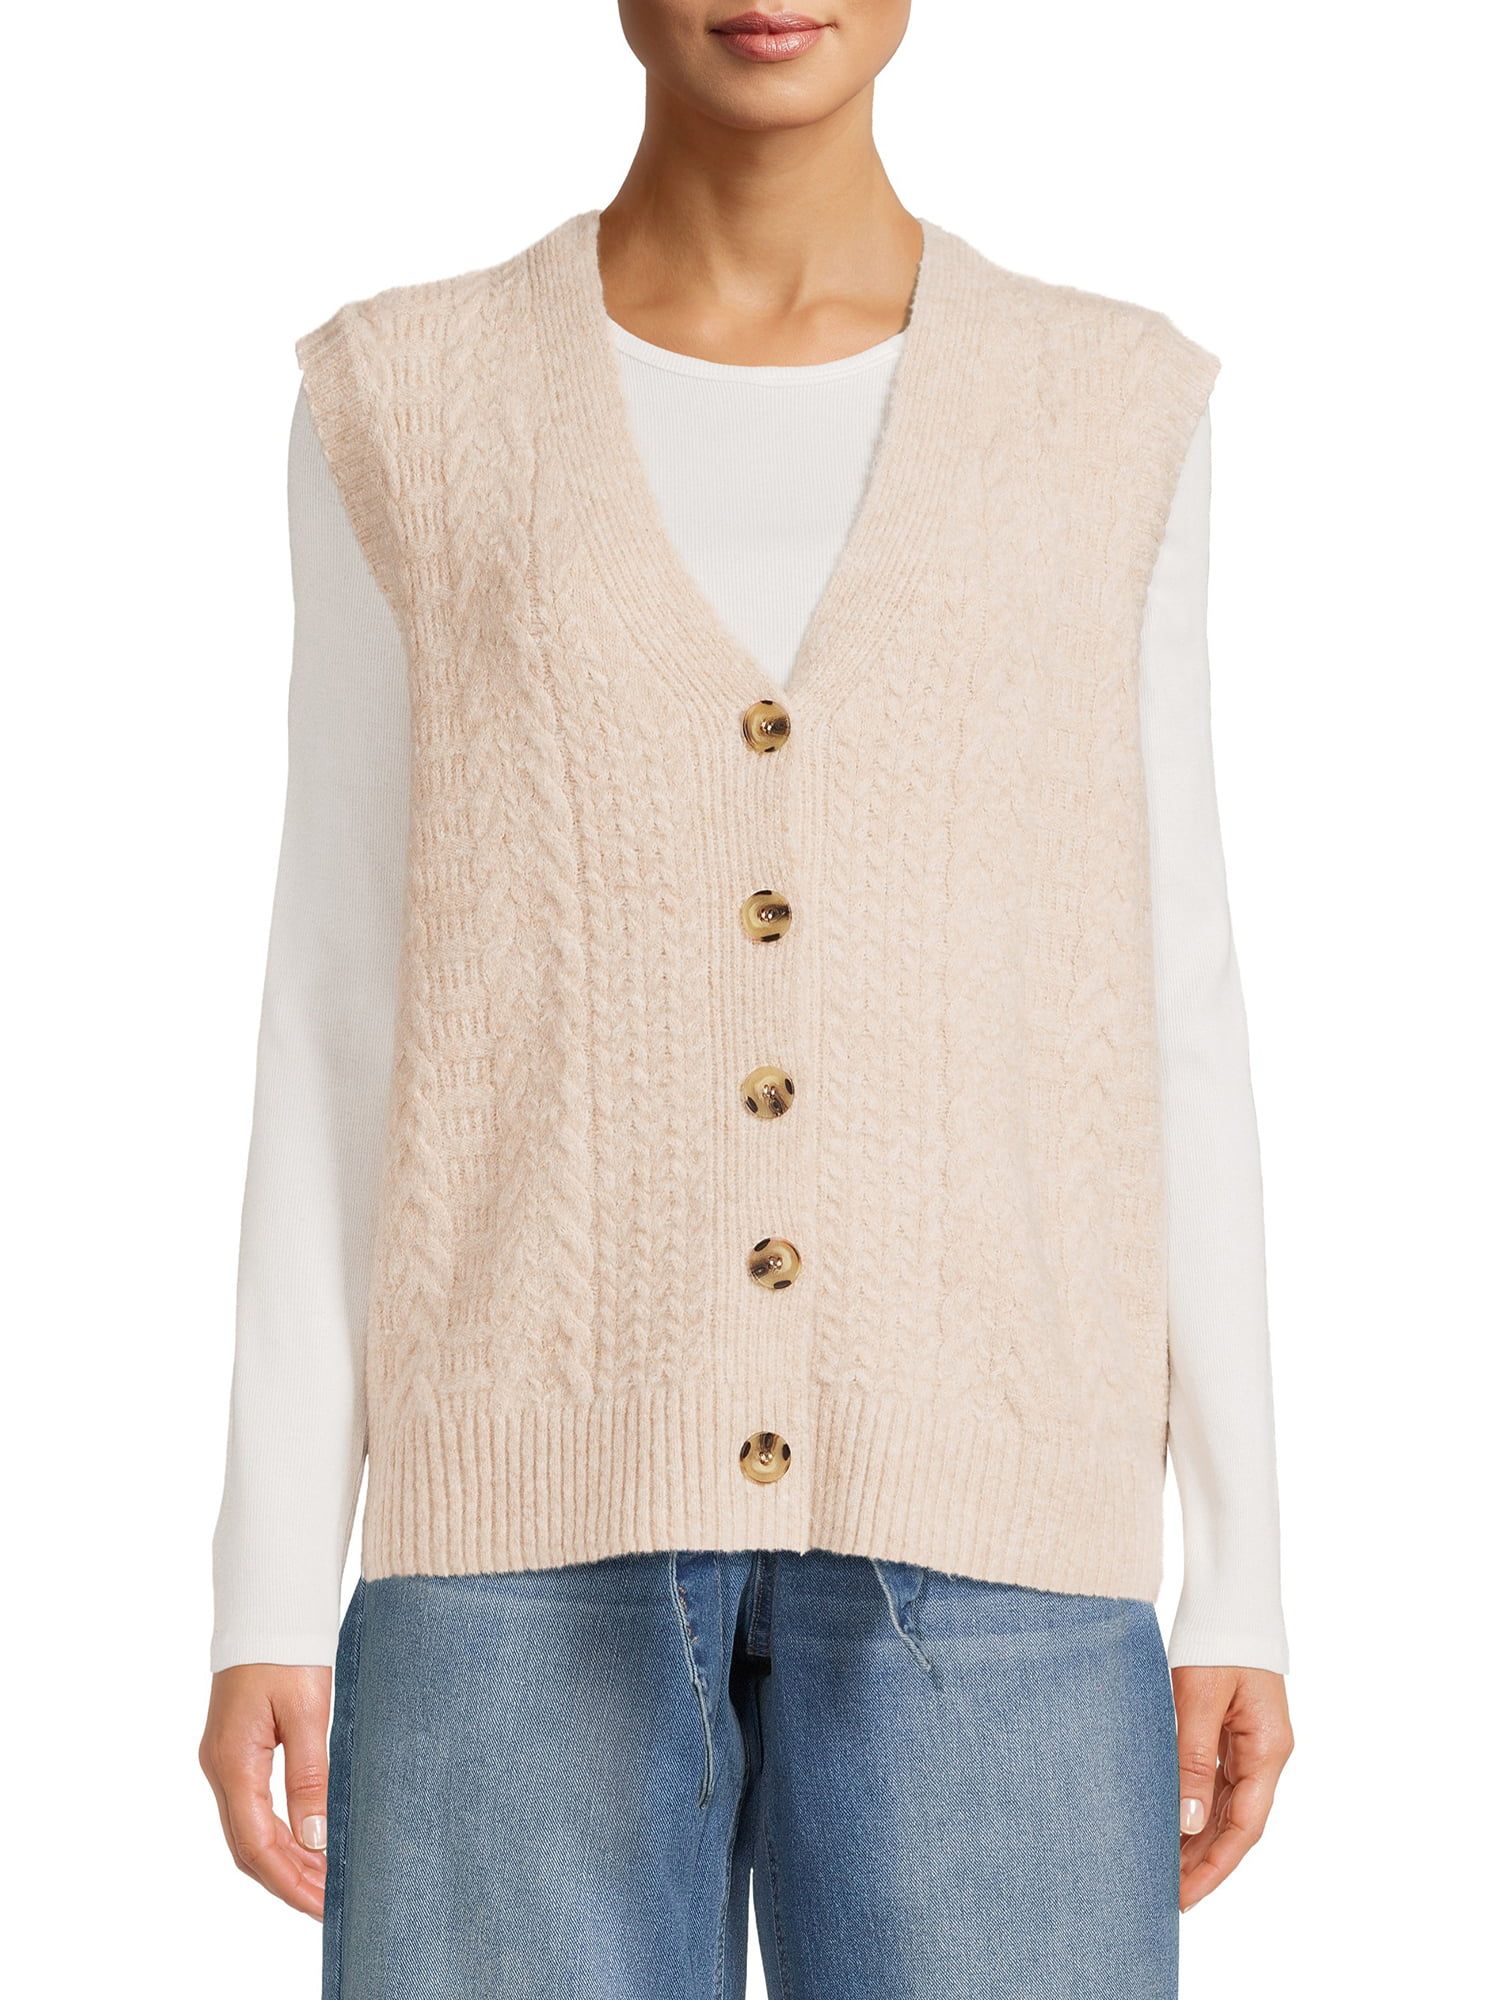 Dreamers by Debut Womens V Cut Cable Knit Sleeveless Sweater Vest | Walmart (US)